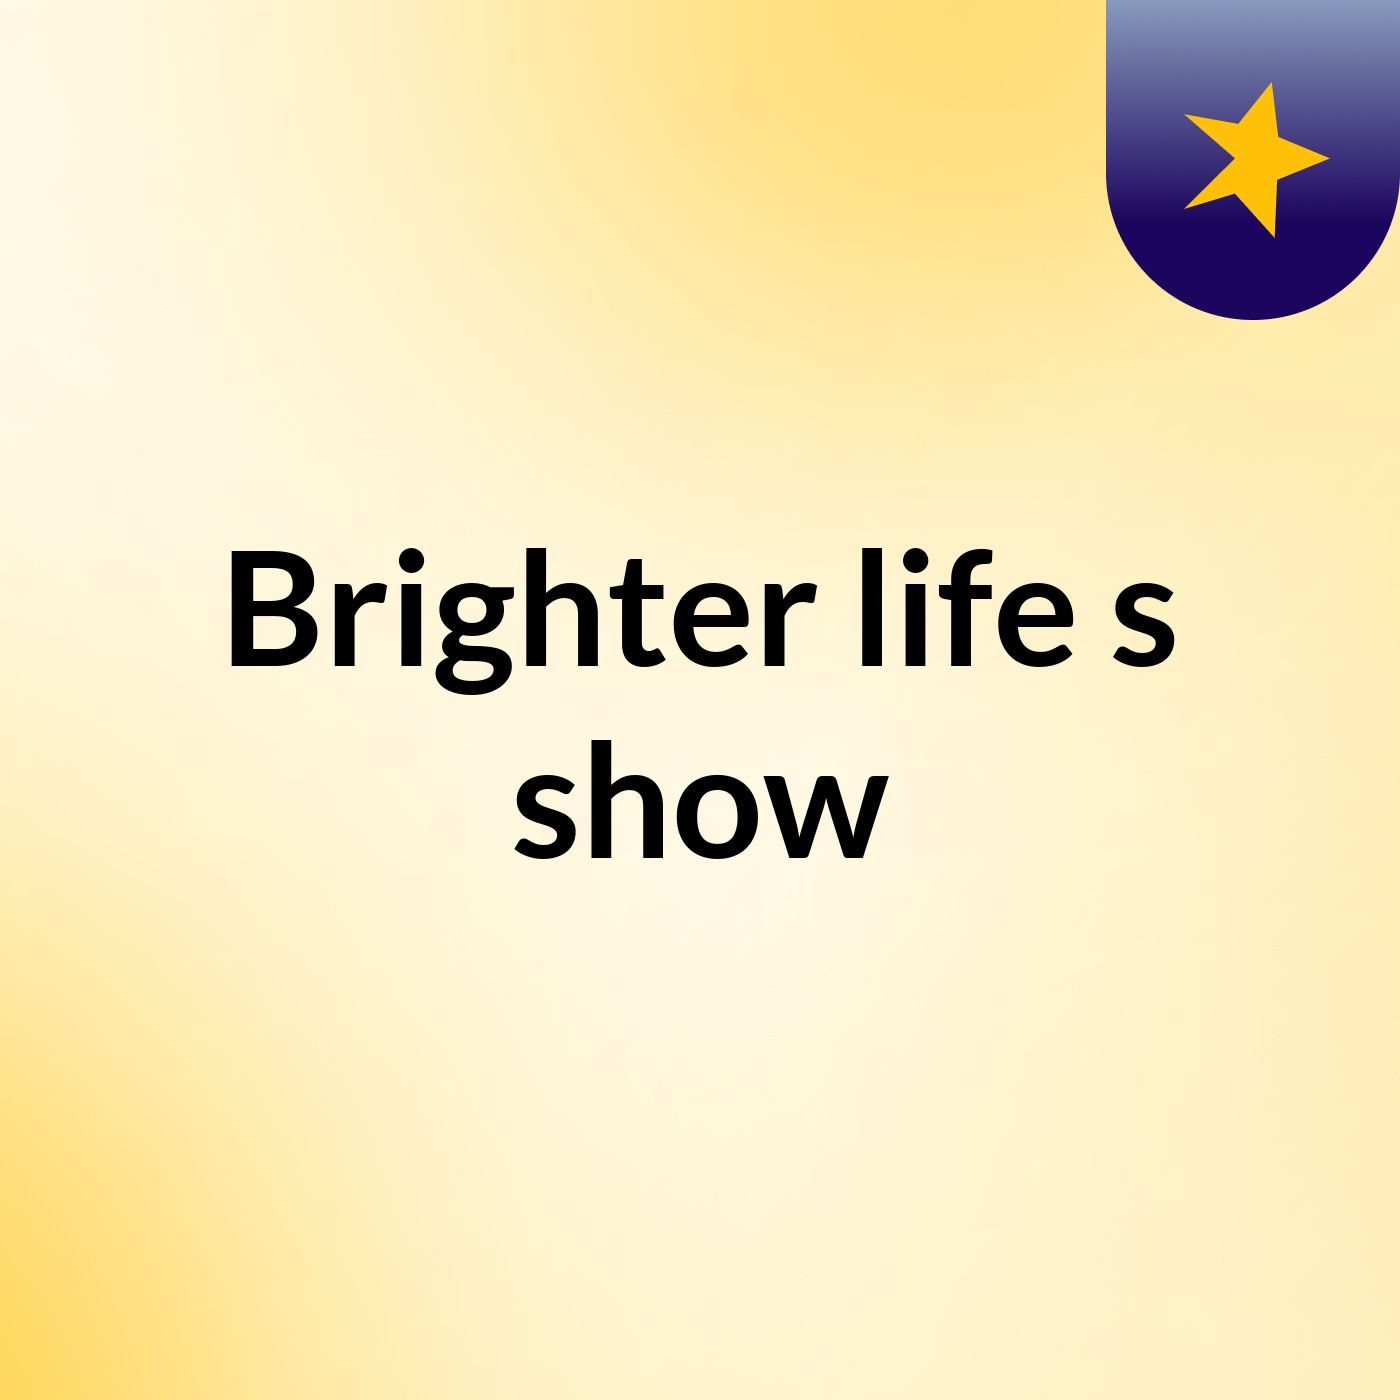 Brighter life's show